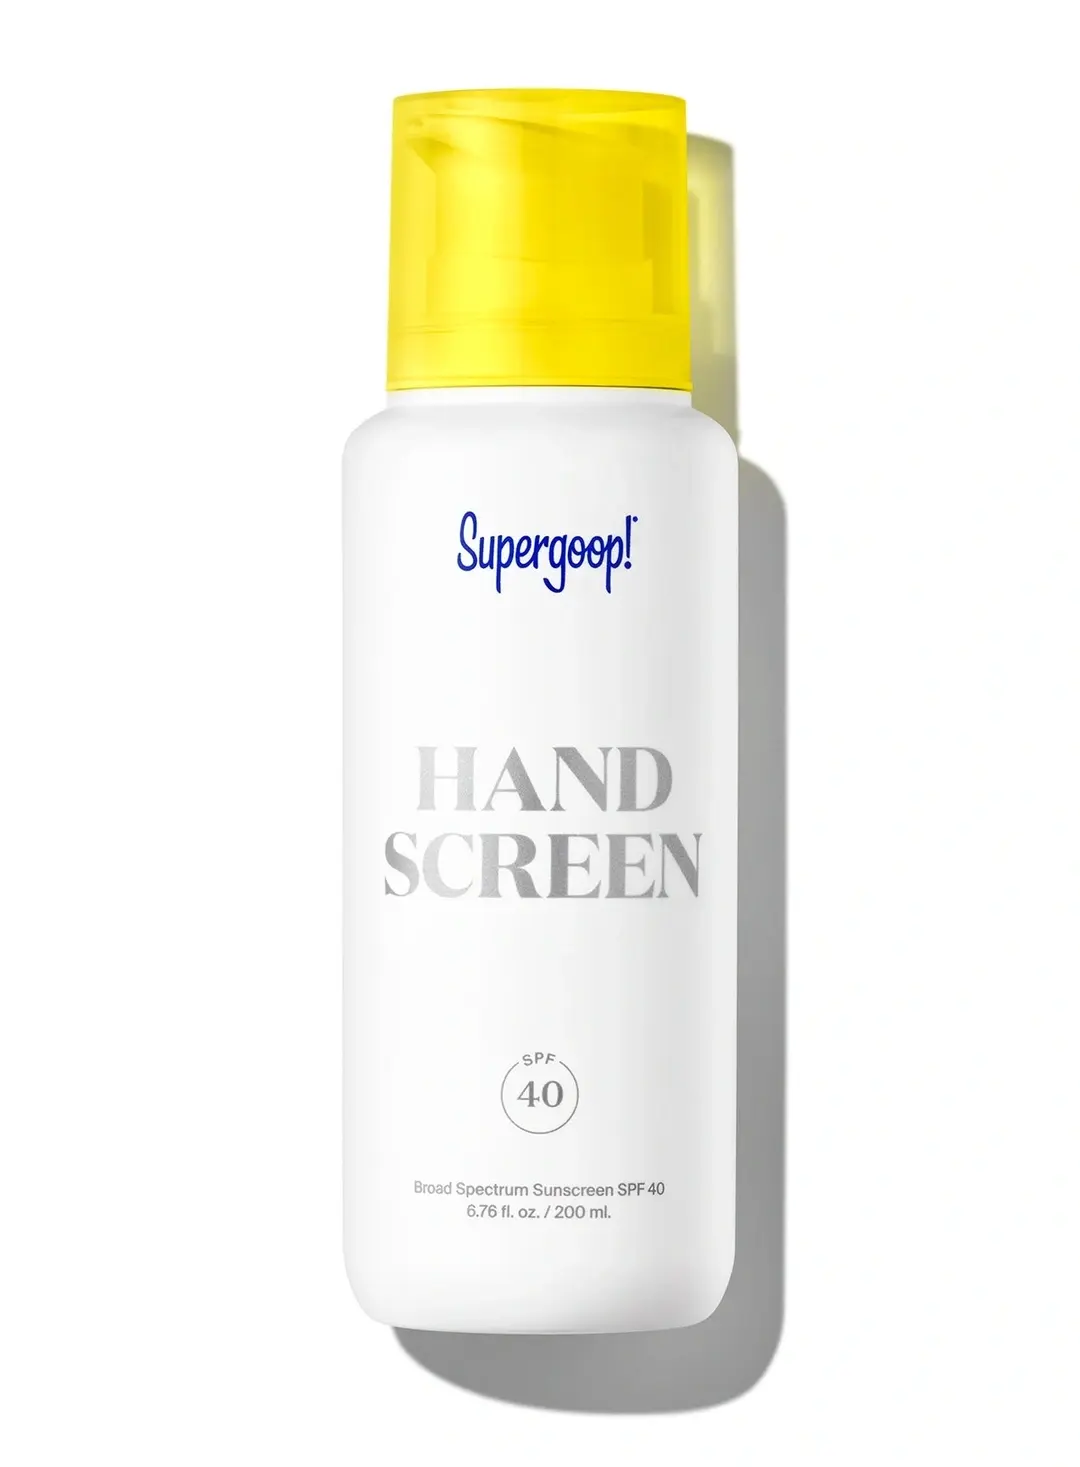 Supergoop! Handscreen SPF 40, 6.76 fl oz - Preventative, SPF Hand Cream For Dry Cracked Hands - Fast-Absorbing, Clean ingredients, Non-Greasy Formula - With Sea Buckthorn, Antioxidants & Natural Oils 6.76 Fl Oz (Pack of 1)